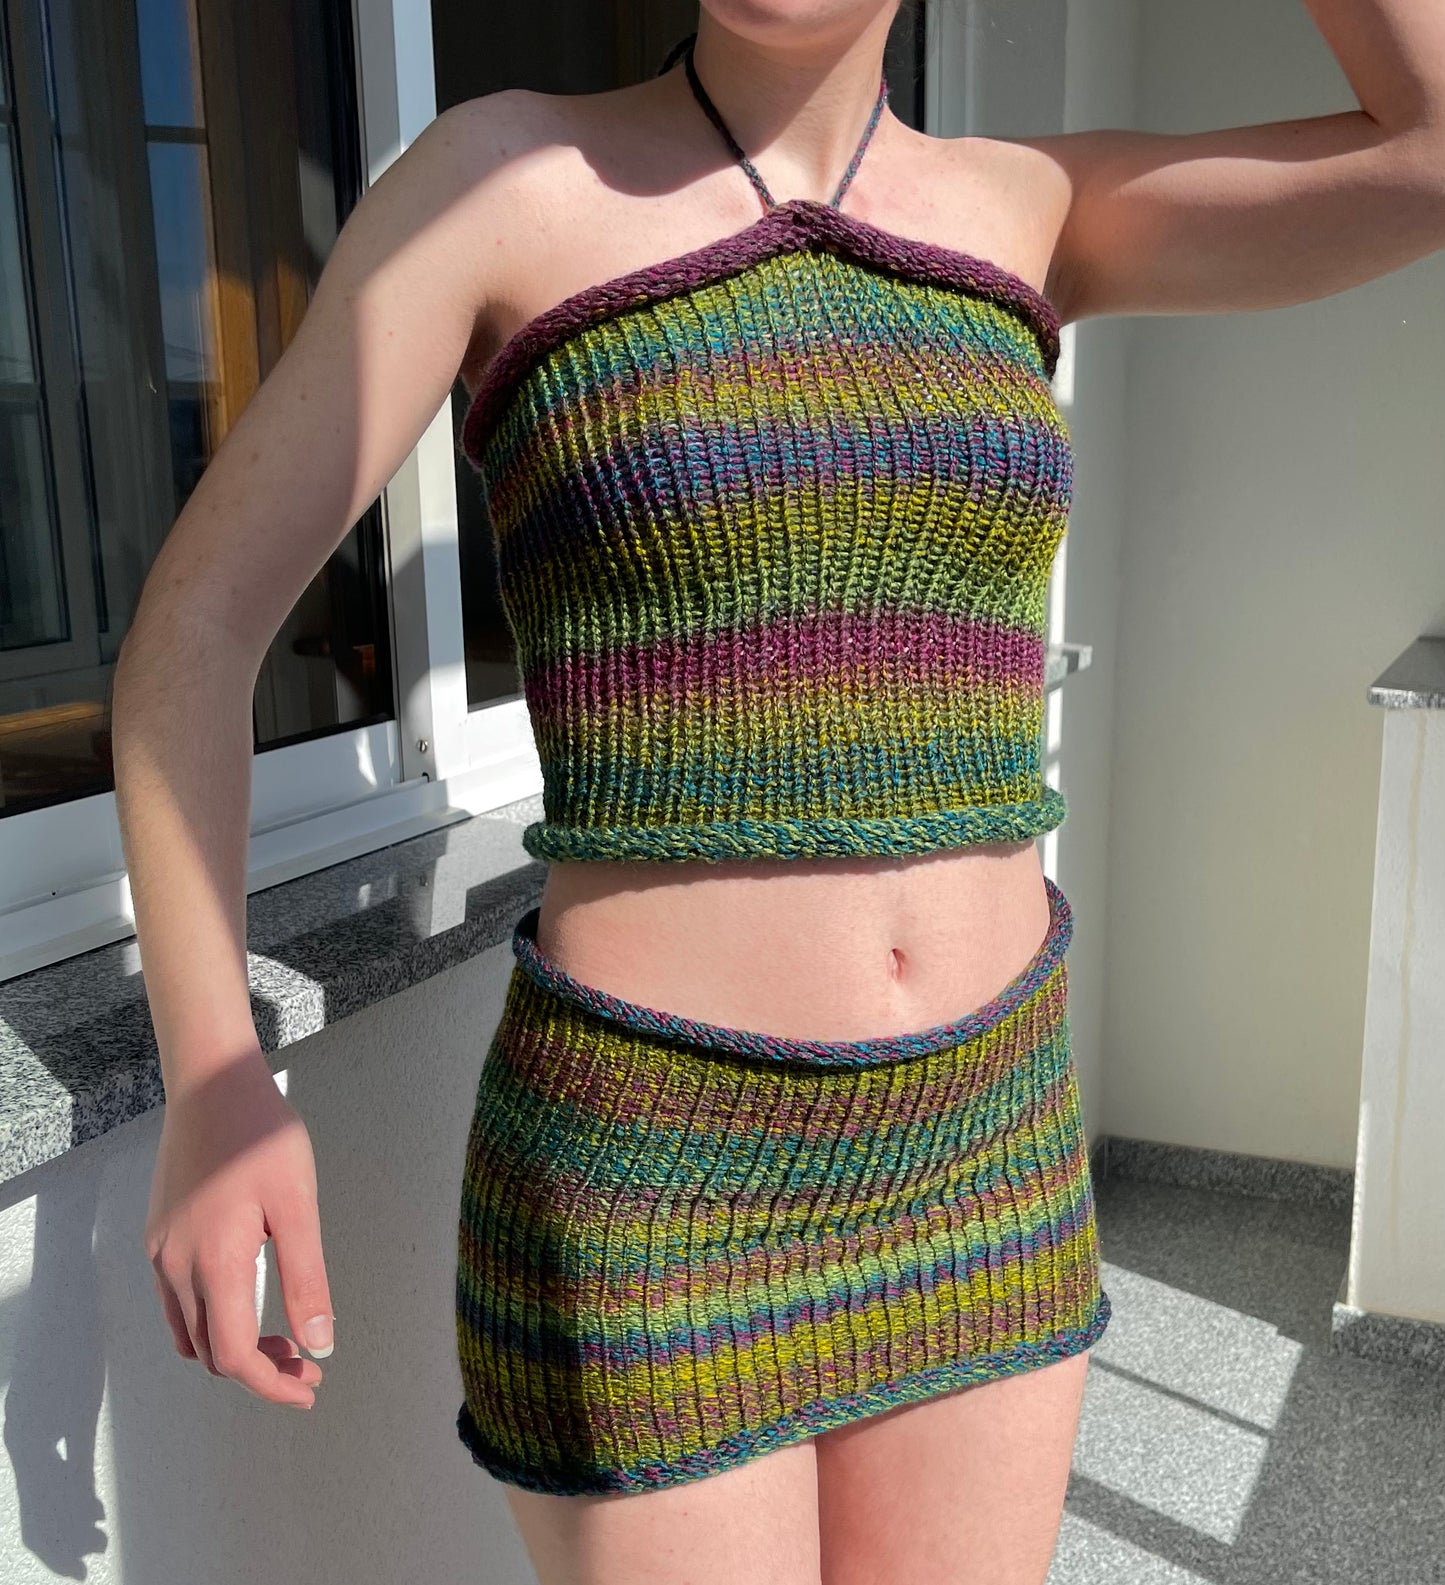 SET: Handmade knitted halter top and skirt in green, purple and blue